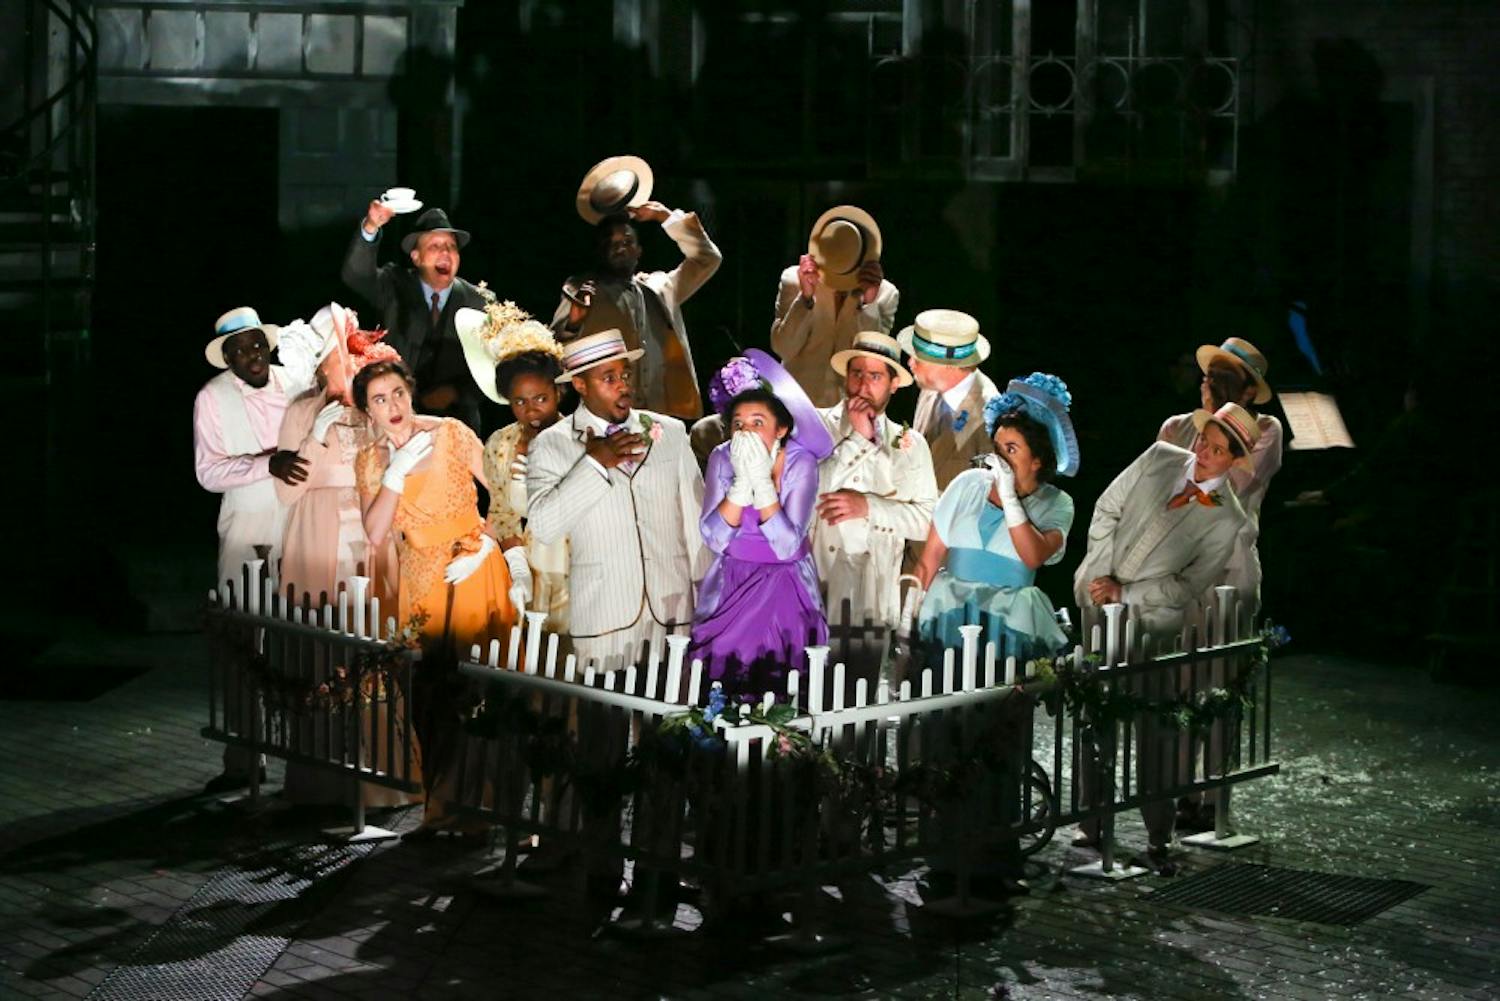 PlayMakers' Repertory Company in their production of "My Fair Lady."&nbsp;Photo taken by&nbsp;Ken Huth, courtesy of Rosalie Preston